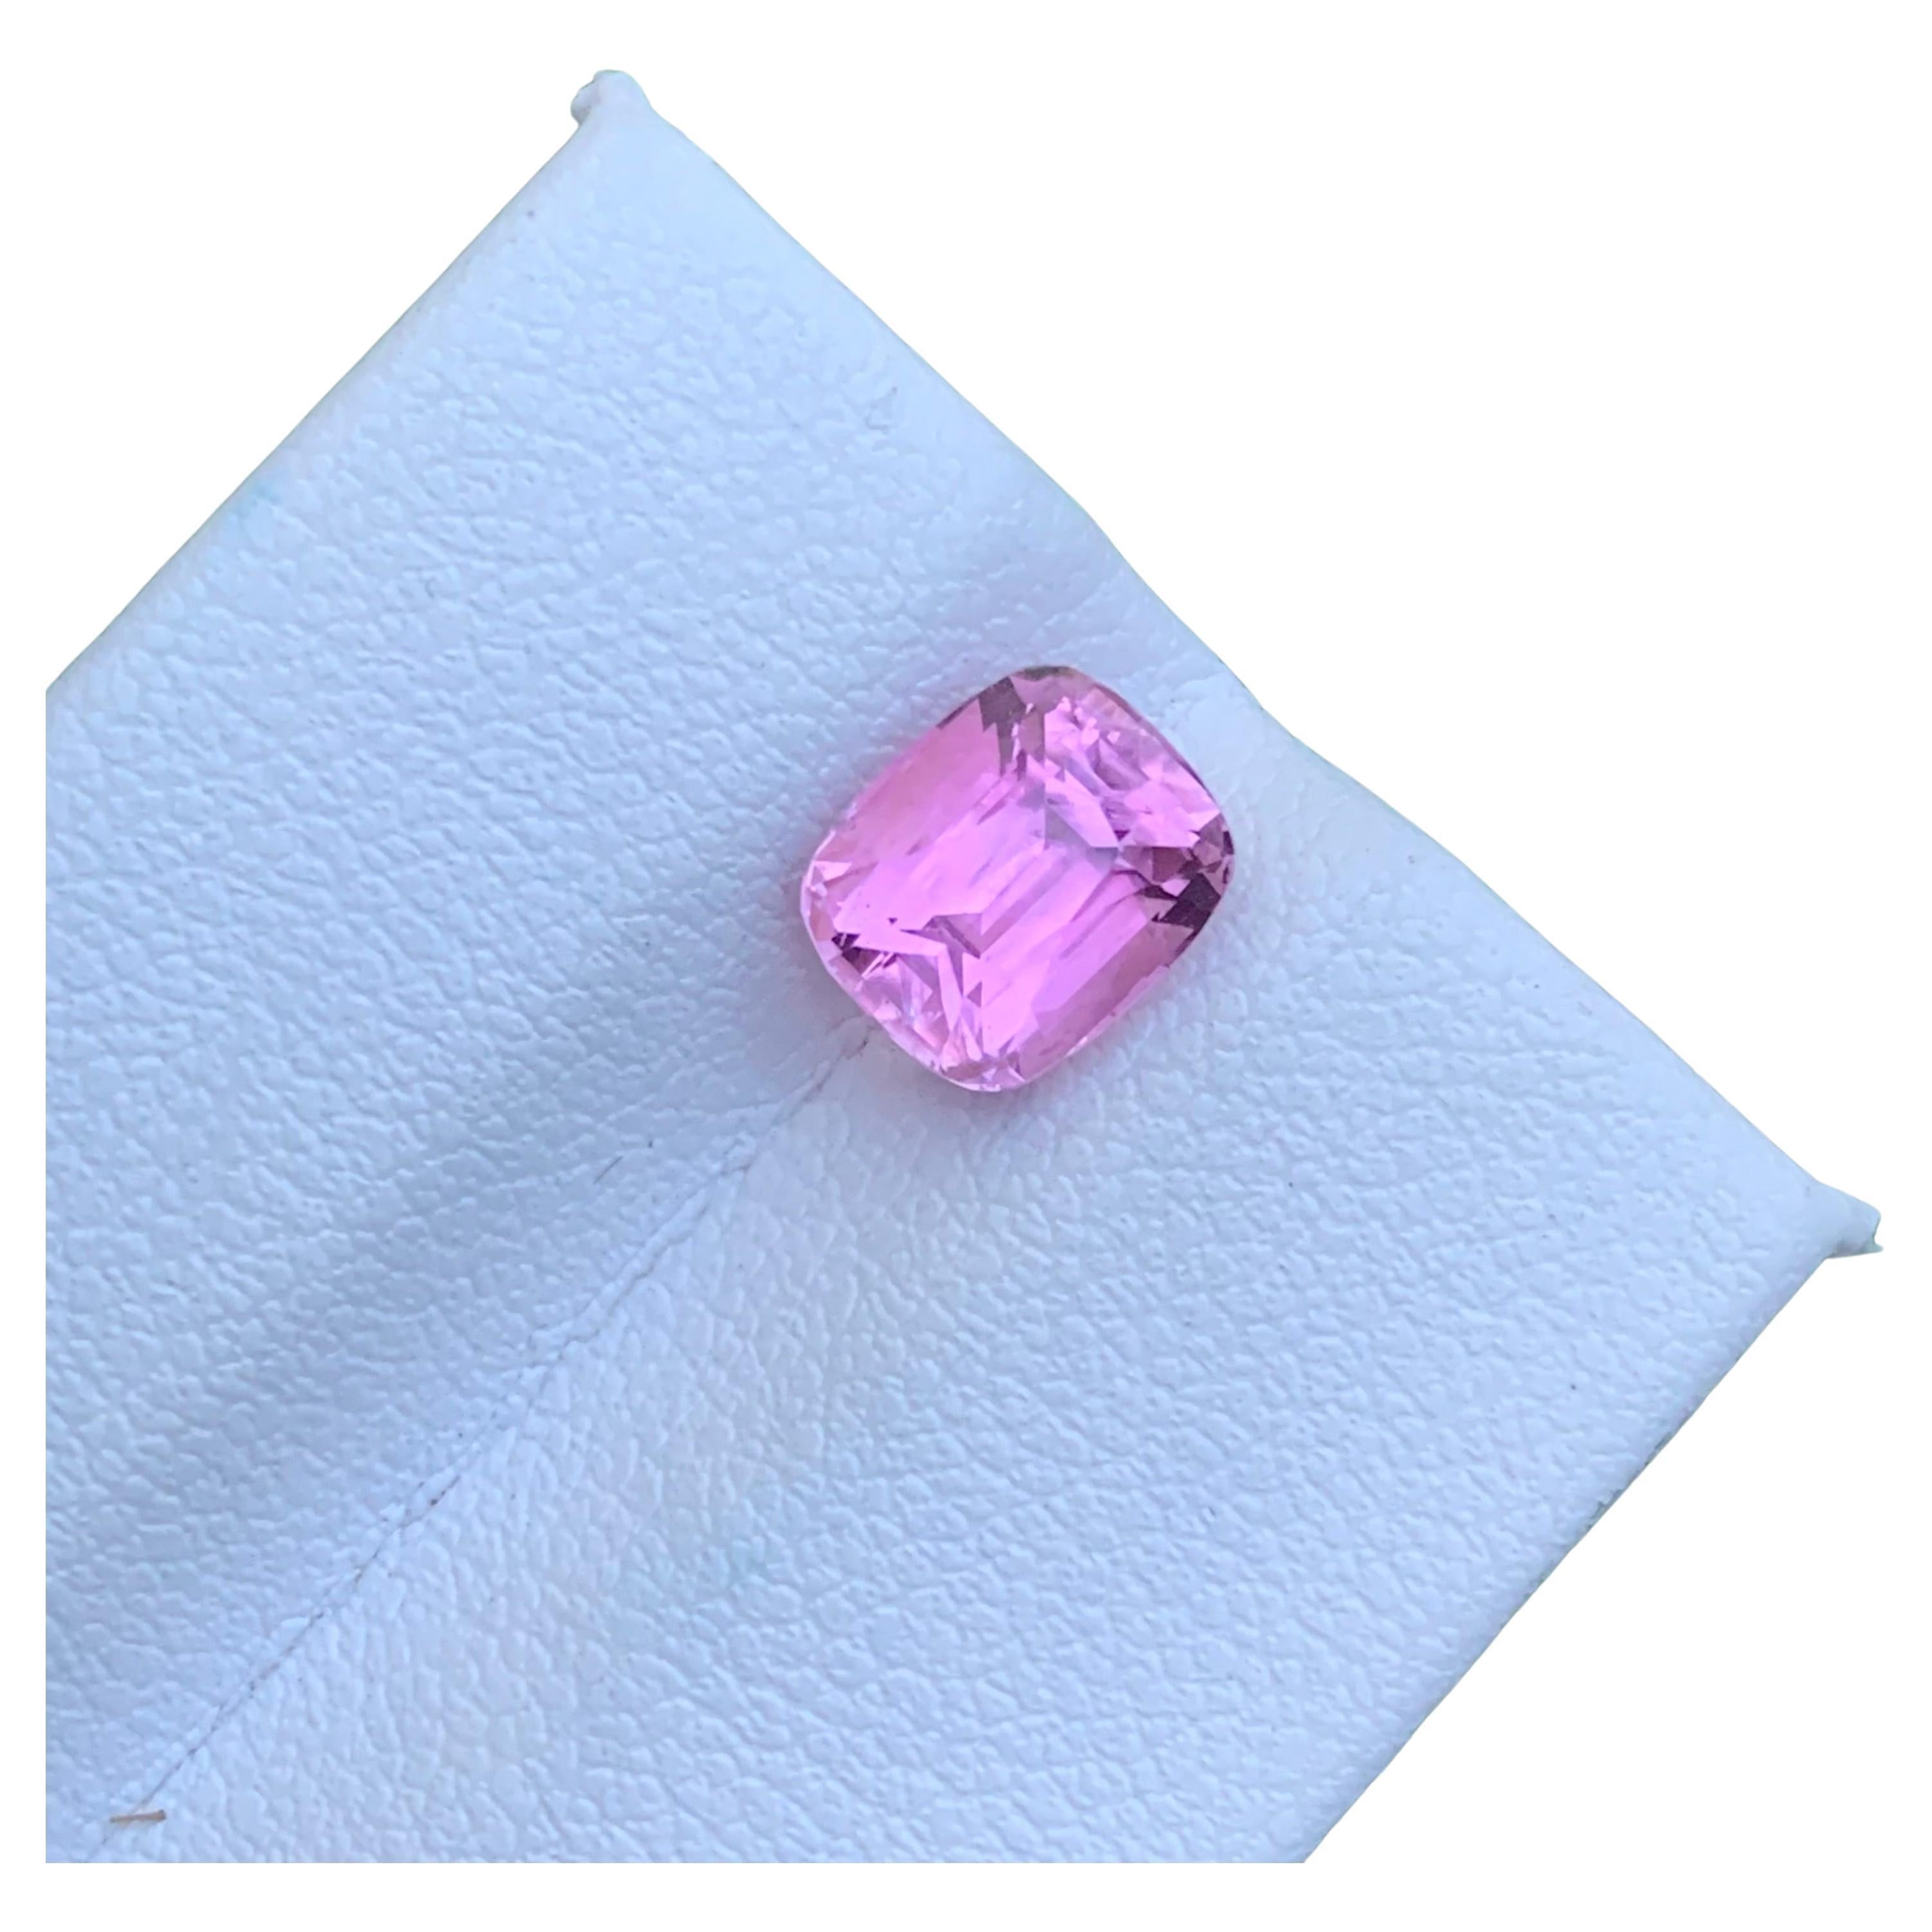 Gorgeous Natural Loose 2.15 Carat Soft Pink Tourmaline from Afghanistan For Sale